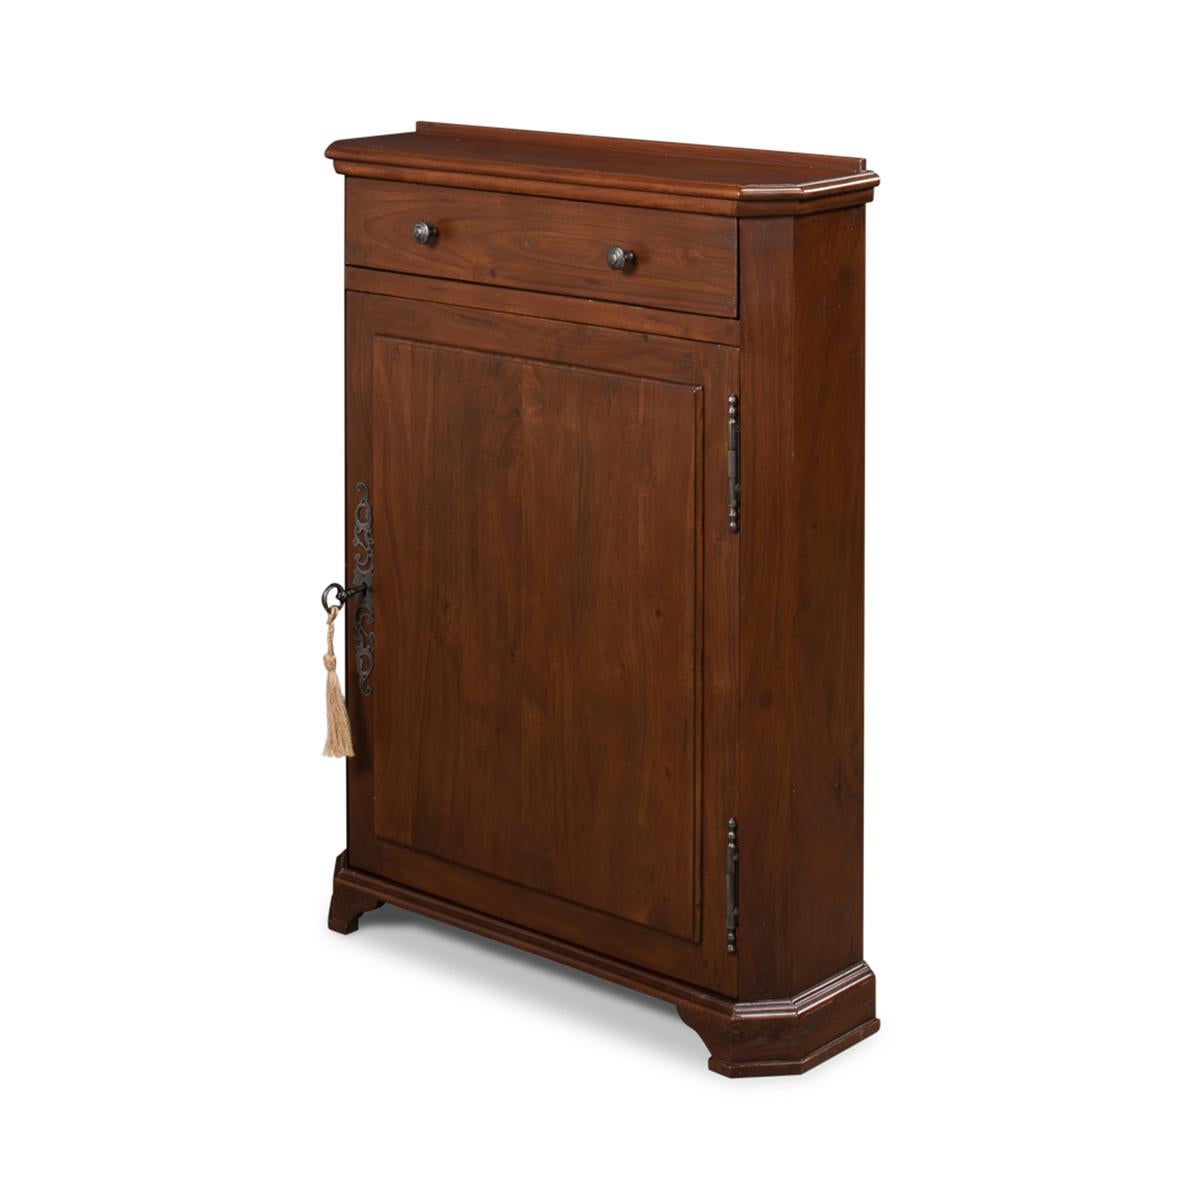 French Regence style walnut side cabinet, this small versatile cabinet works well in almost any style of decor. With a wonderful warm walnut finish, the slim cabinet has a single drawer and cabinet door with a unique French escutcheon and key,